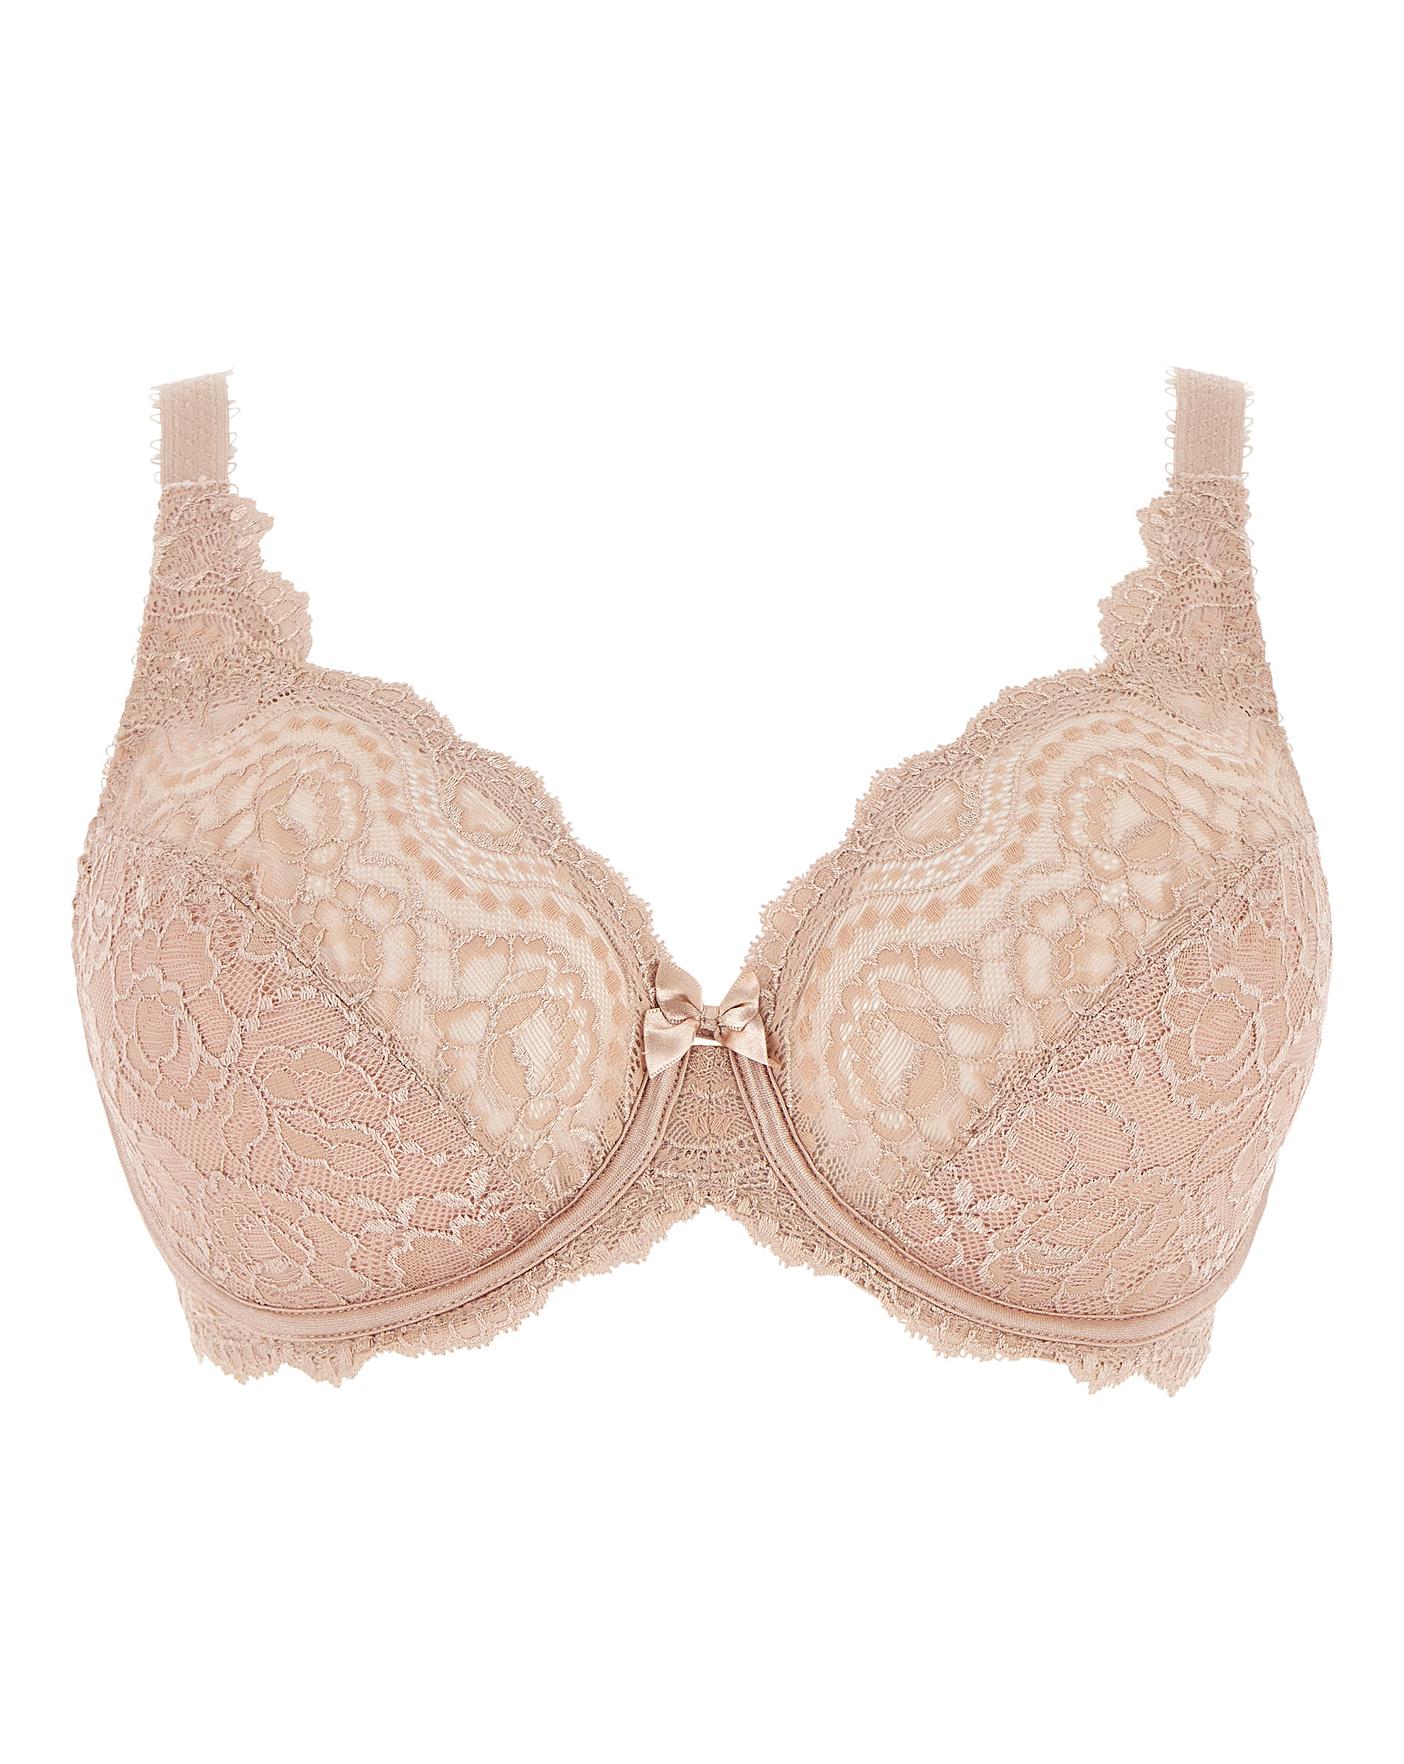 Playtex Flower Lace Full Cup Wired Bra